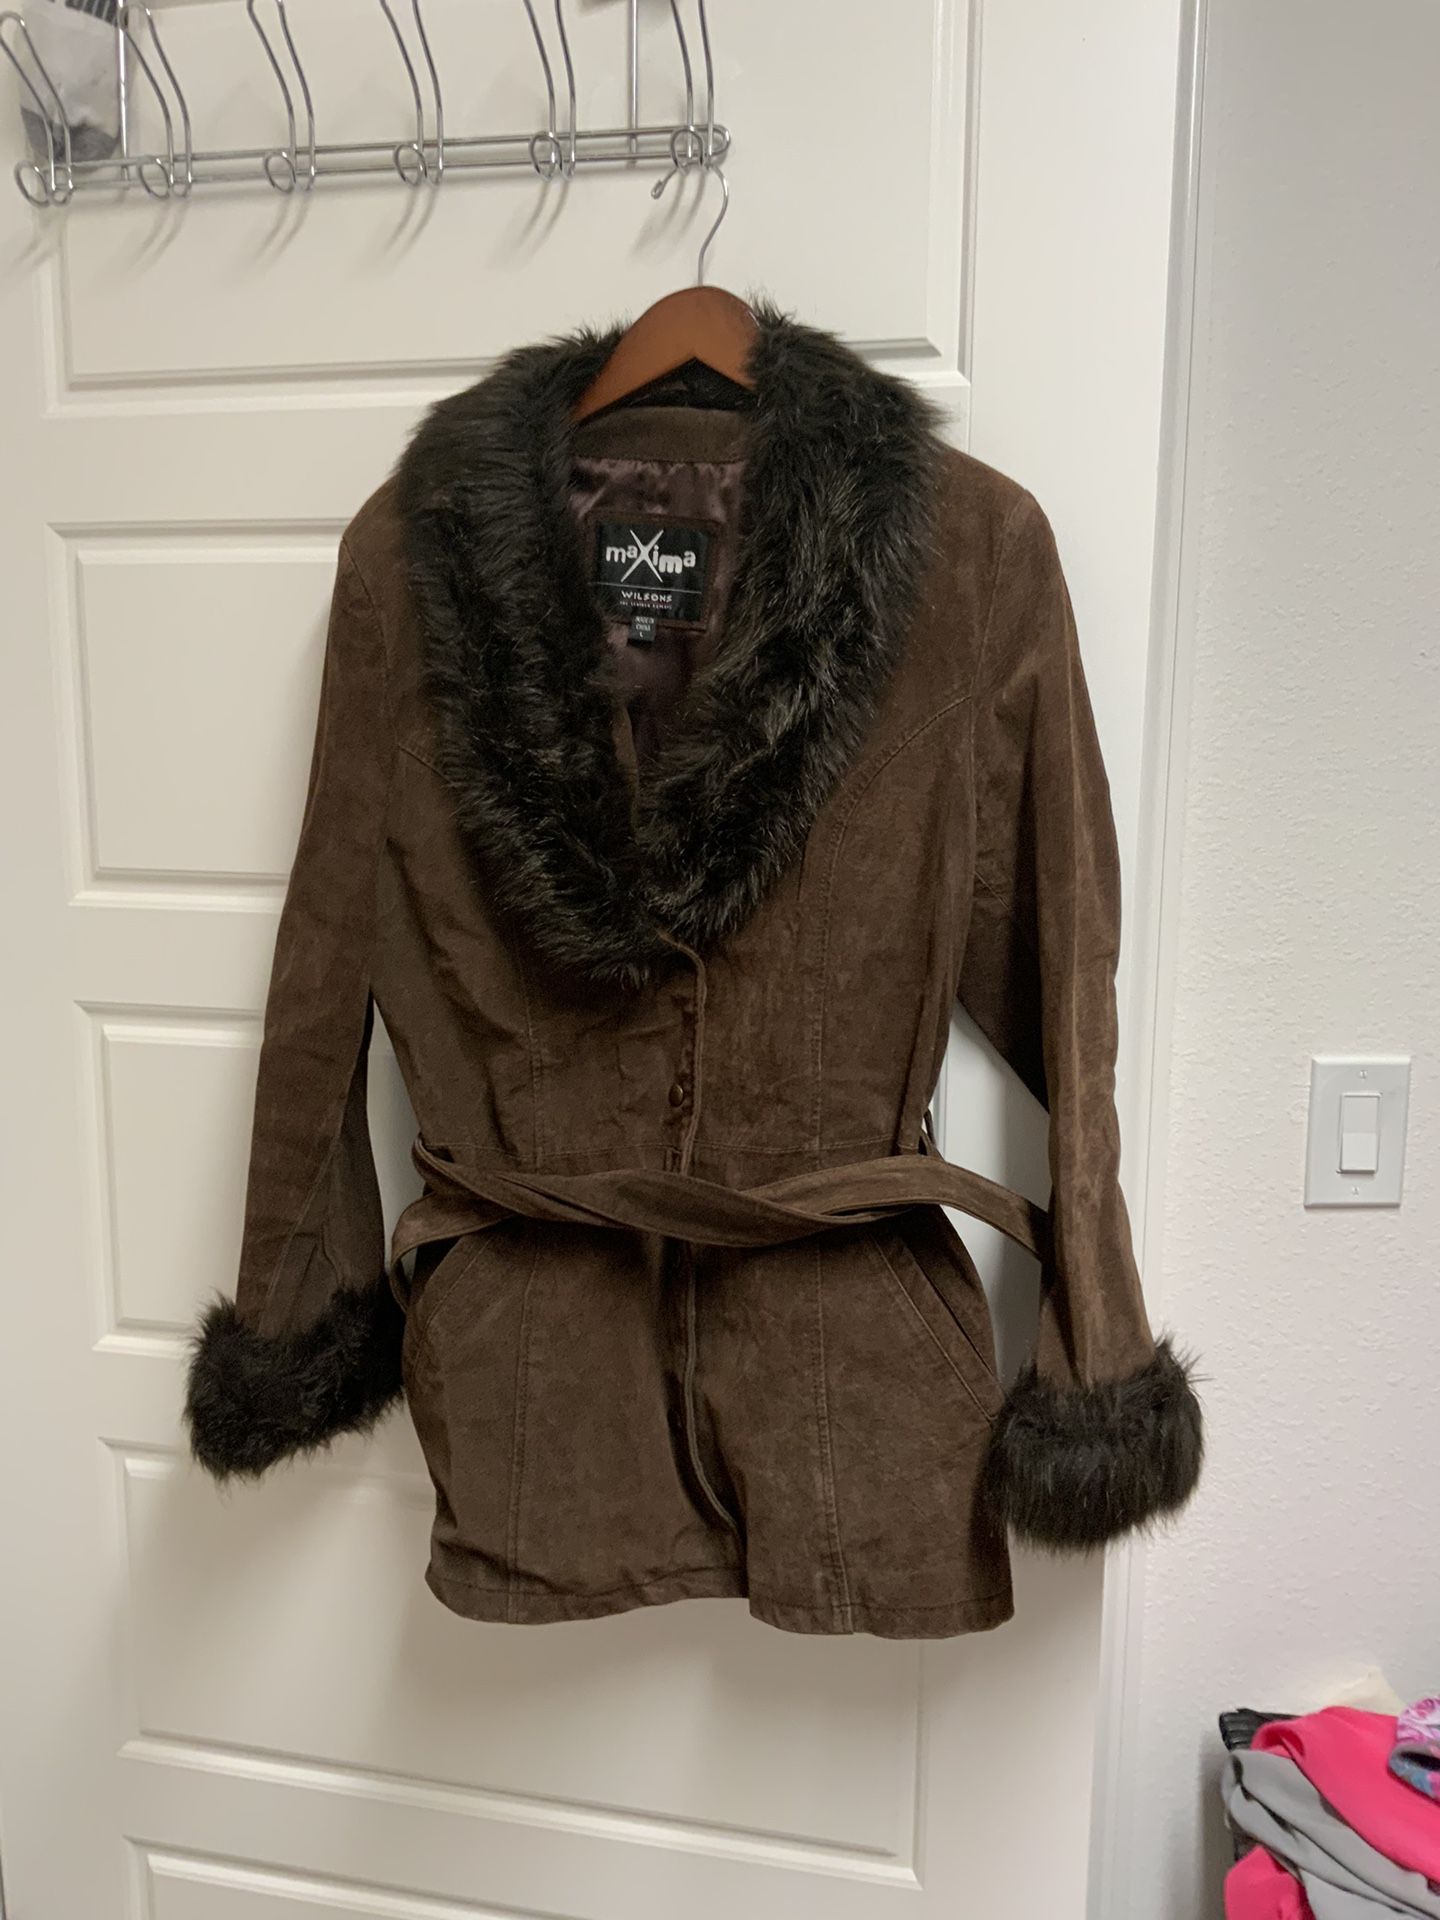 Wilson Maxima suede jacket with belt and Fur Collar  (vintage)